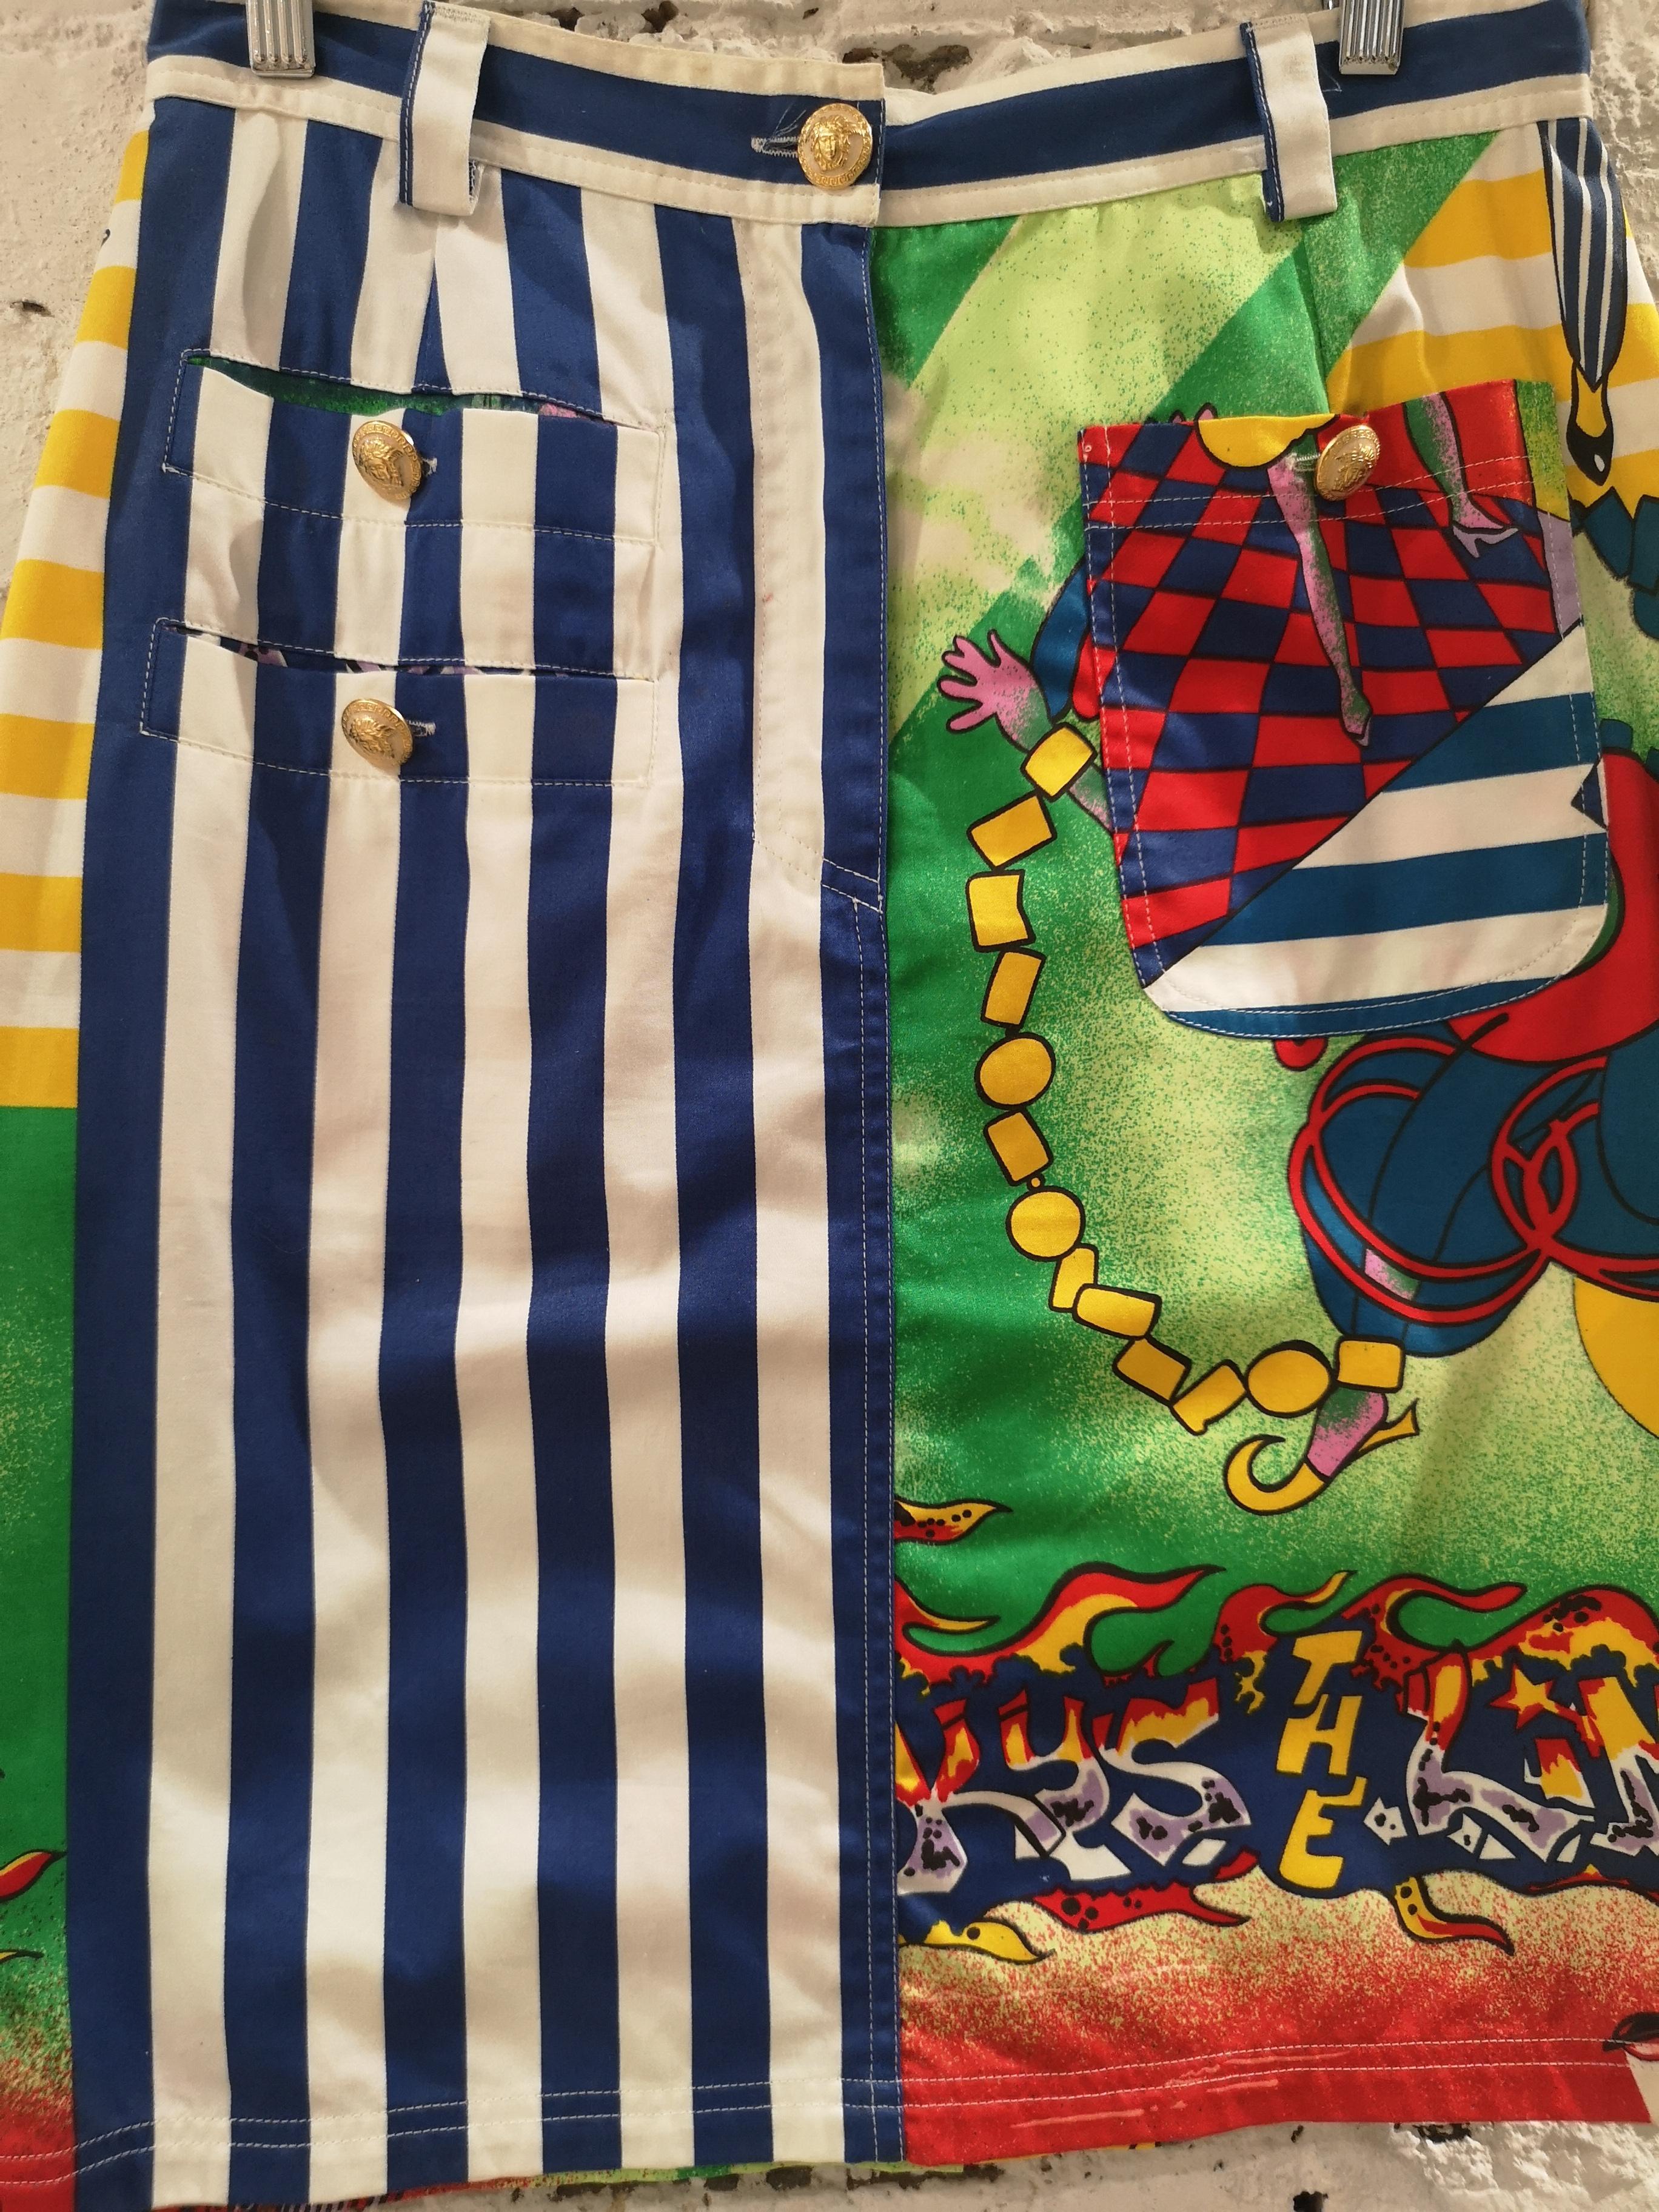 Gianni Versace jazz cotton skirt 
Versace Jazz skirt, blue white stripes and multicoloured cotton skirt totally made in italy in size 46 
embellished with logo buttons
measurements:
waist 76 cm
lenght 57 cm